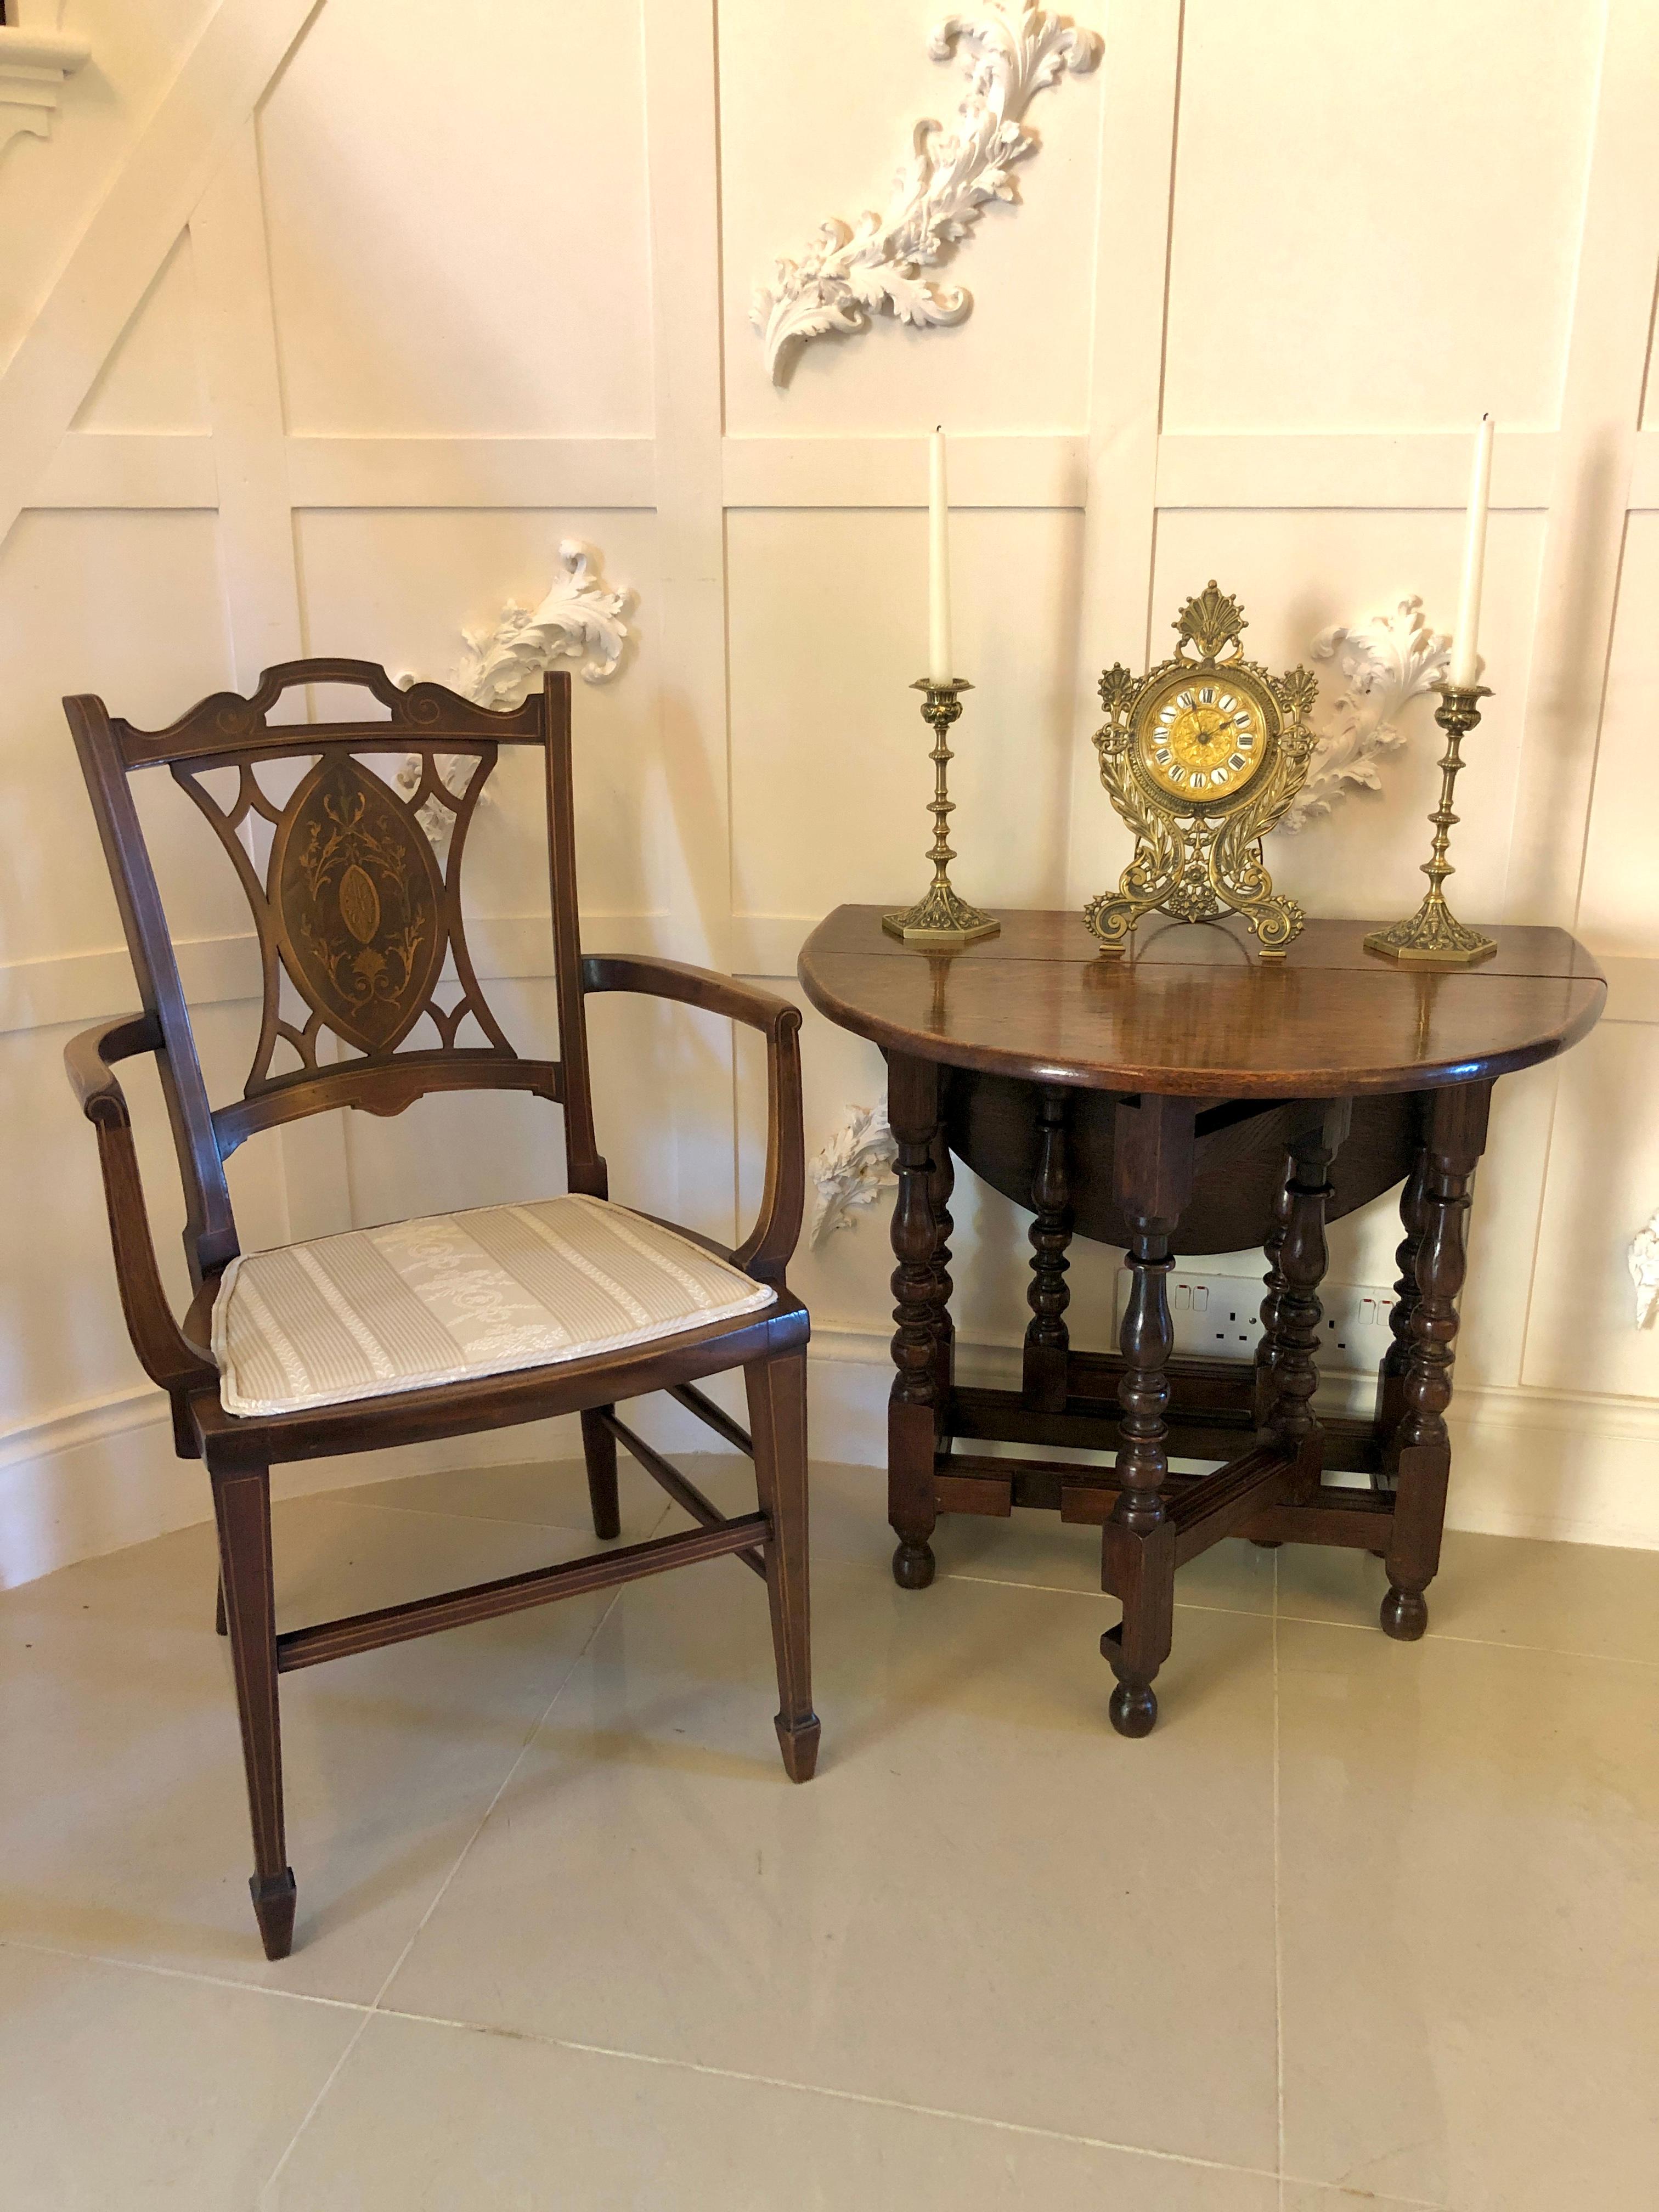 Antique oak gateleg table having a quality oak top with two drop leaves supported by delightful turned and shaped columns. It has two swing out gatelegs united by solid oaks stretchers and is raised on turned bun feet.

A splendid all original